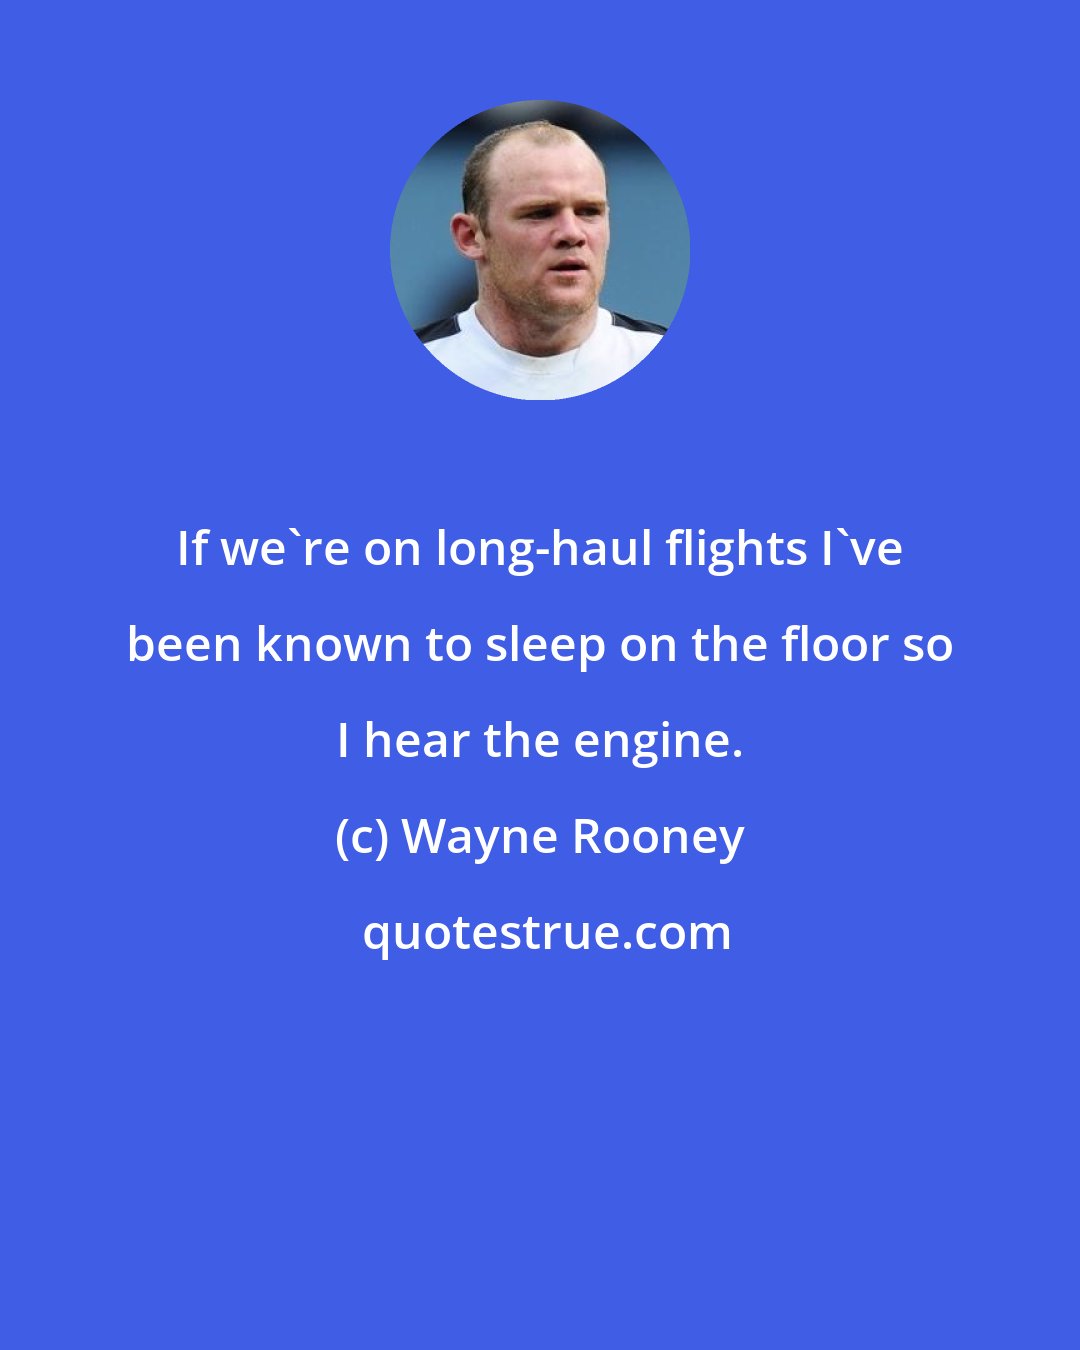 Wayne Rooney: If we're on long-haul flights I've been known to sleep on the floor so I hear the engine.